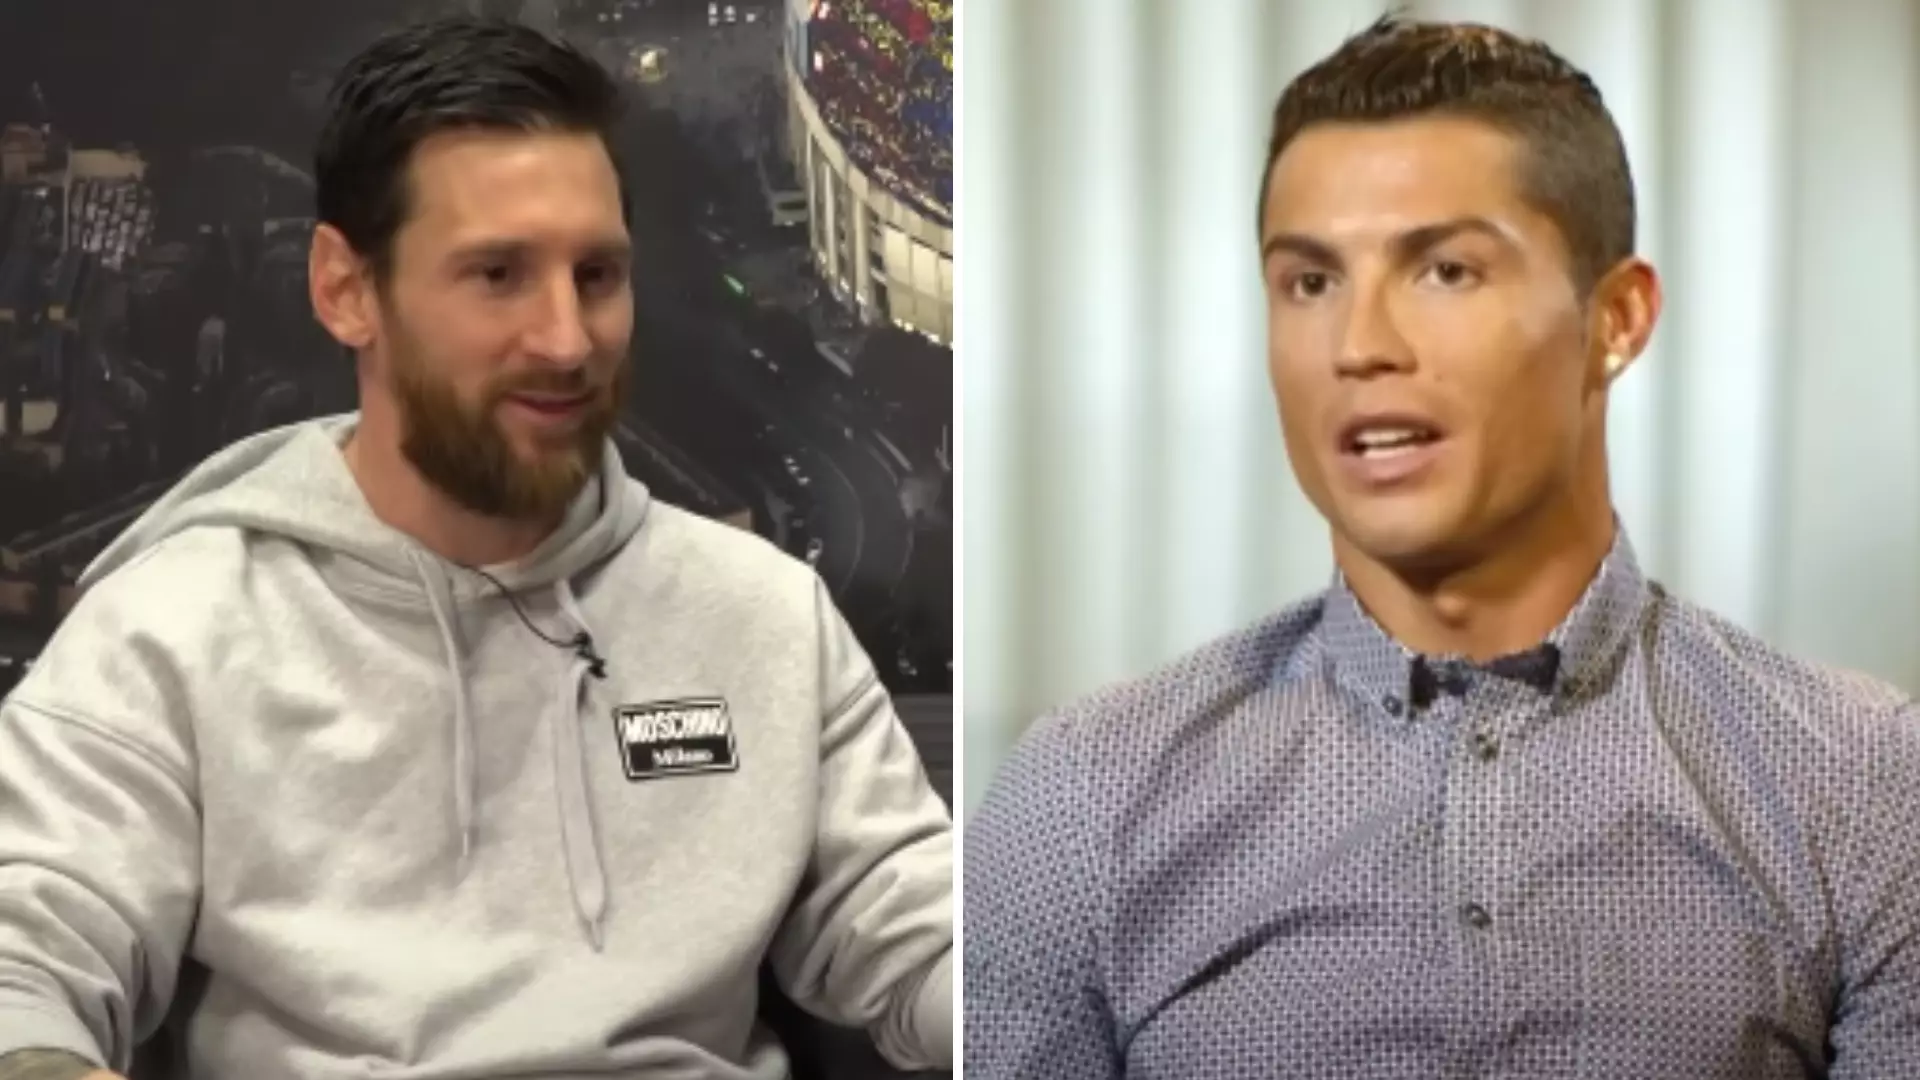 Lionel Messi Names His Top Five Best Players In World Football Not Including Himself Or Cristiano Ronaldo